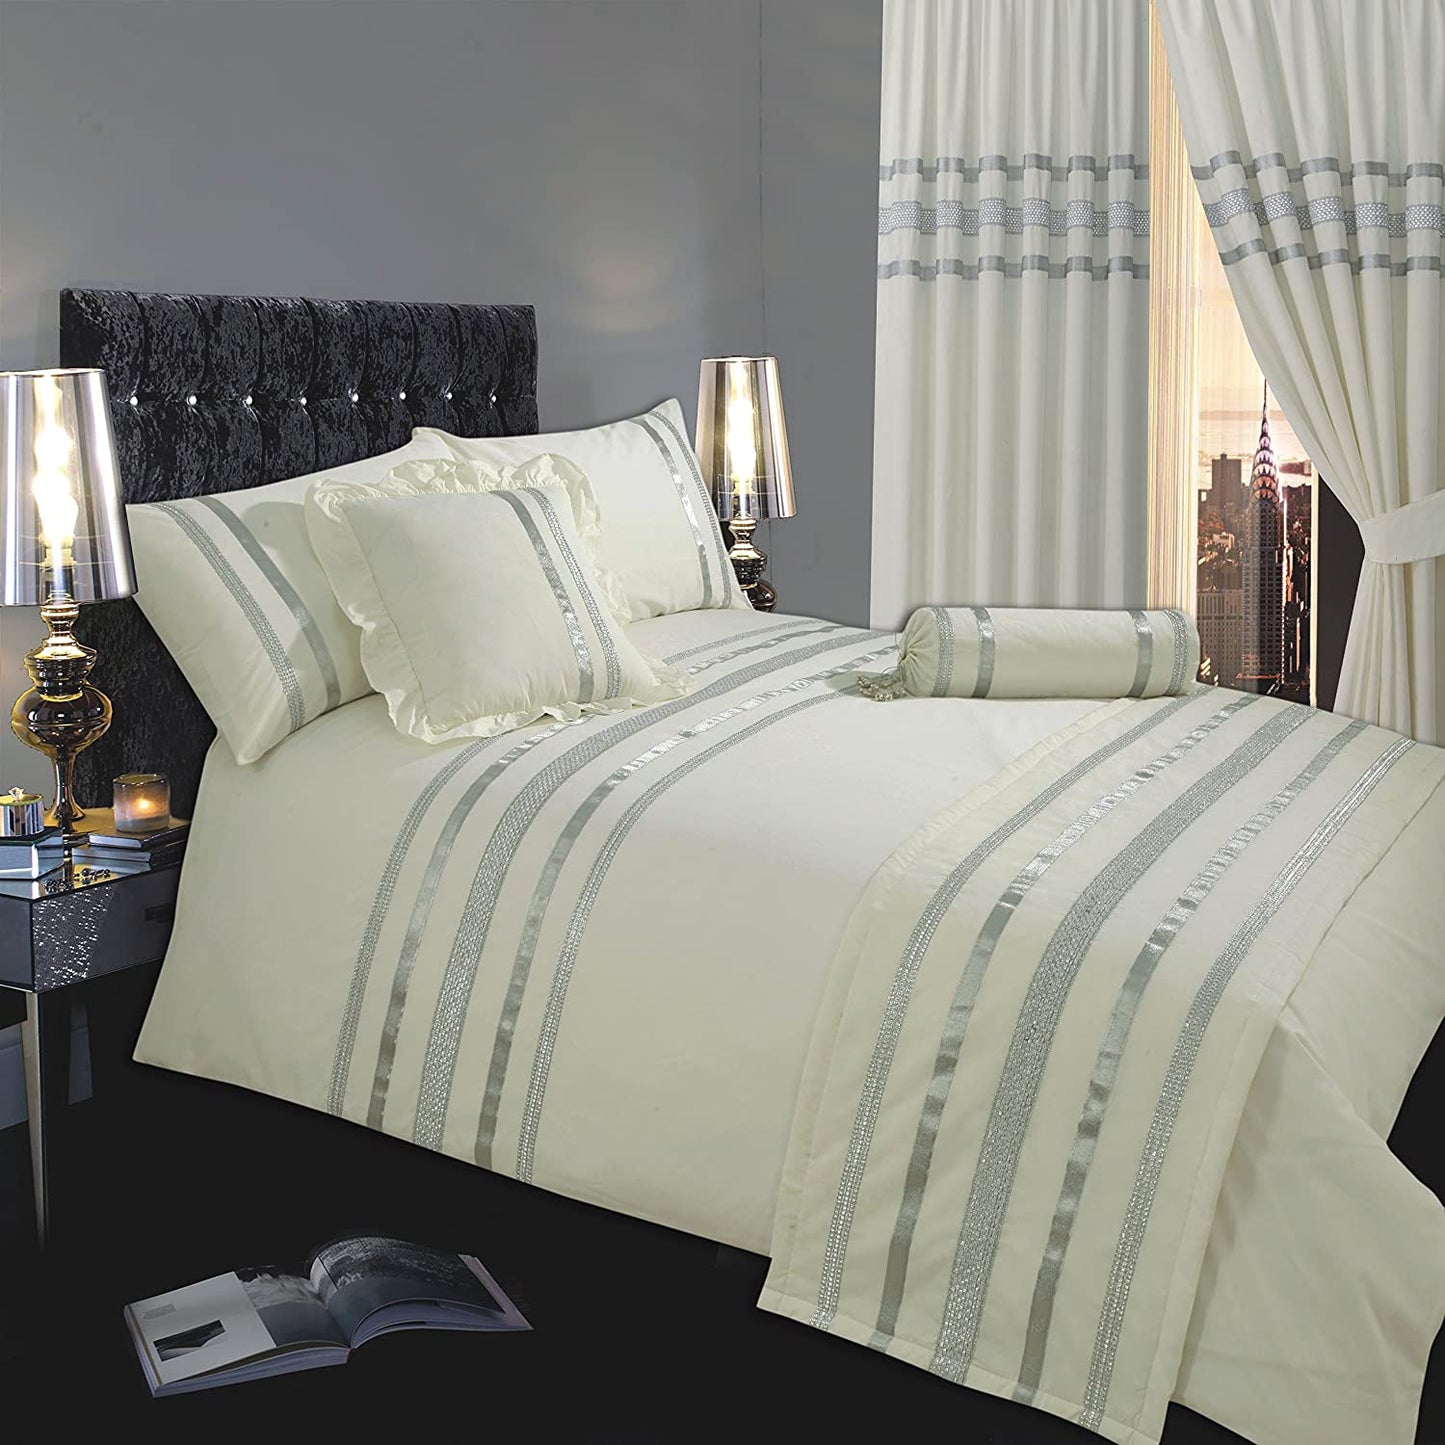 Double Bed Glamour Cream Silver Trim Duvet Cover Set